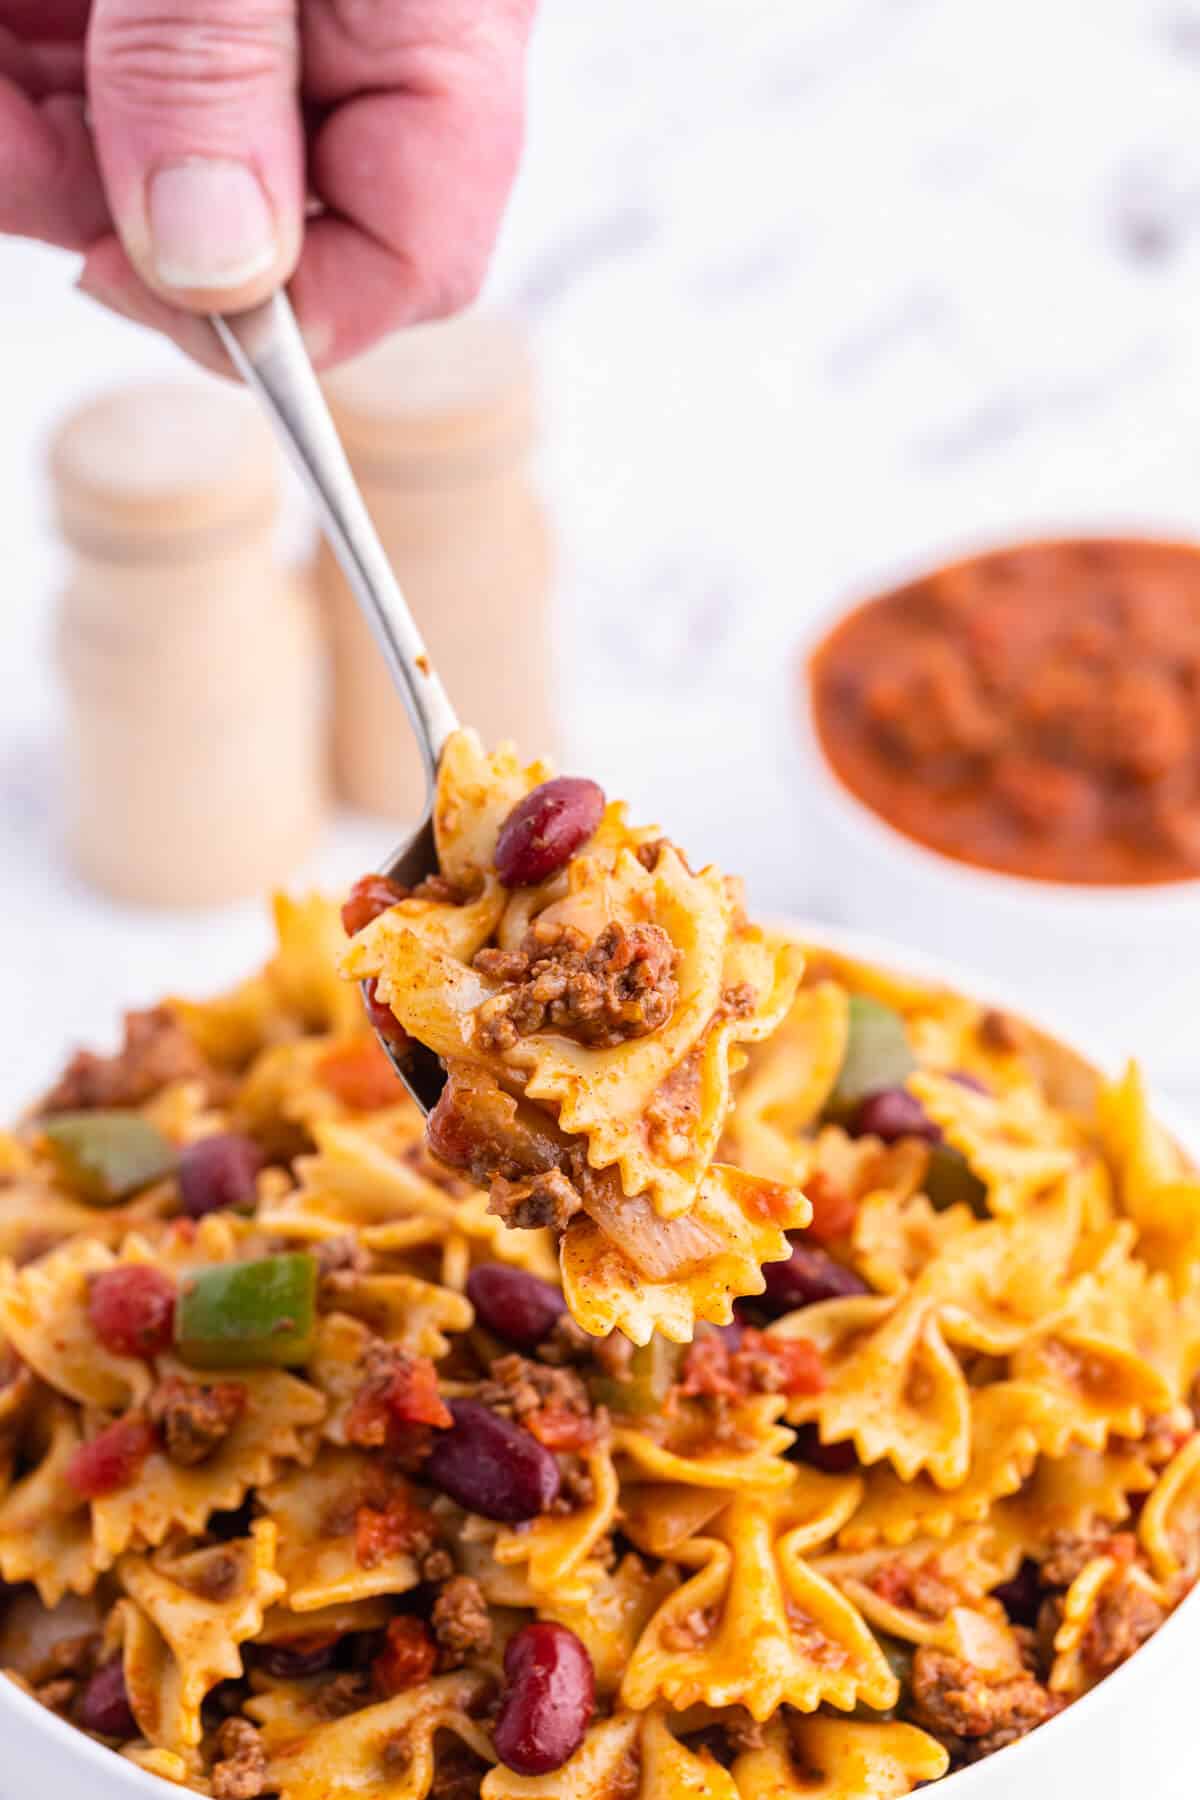 A serving spoon with chili pasta salad.